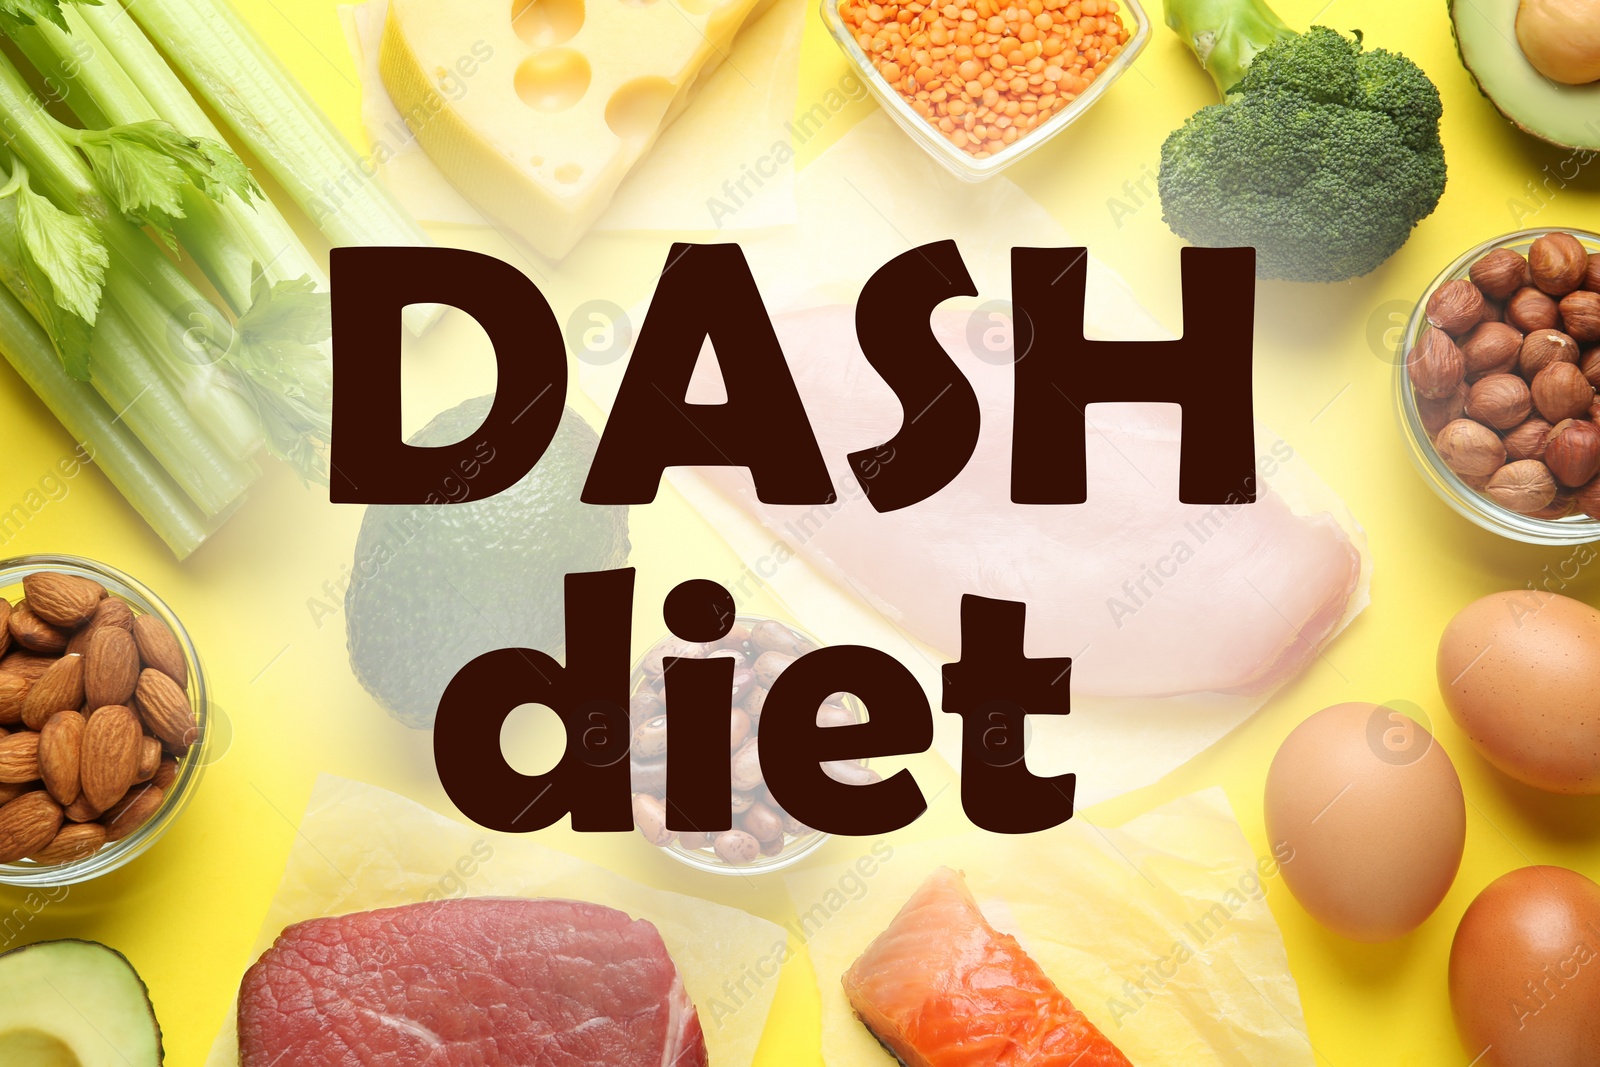 Image of Dietary approaches to stop hypertension (Dash diet). Many different healthy food on yellow table, flat lay